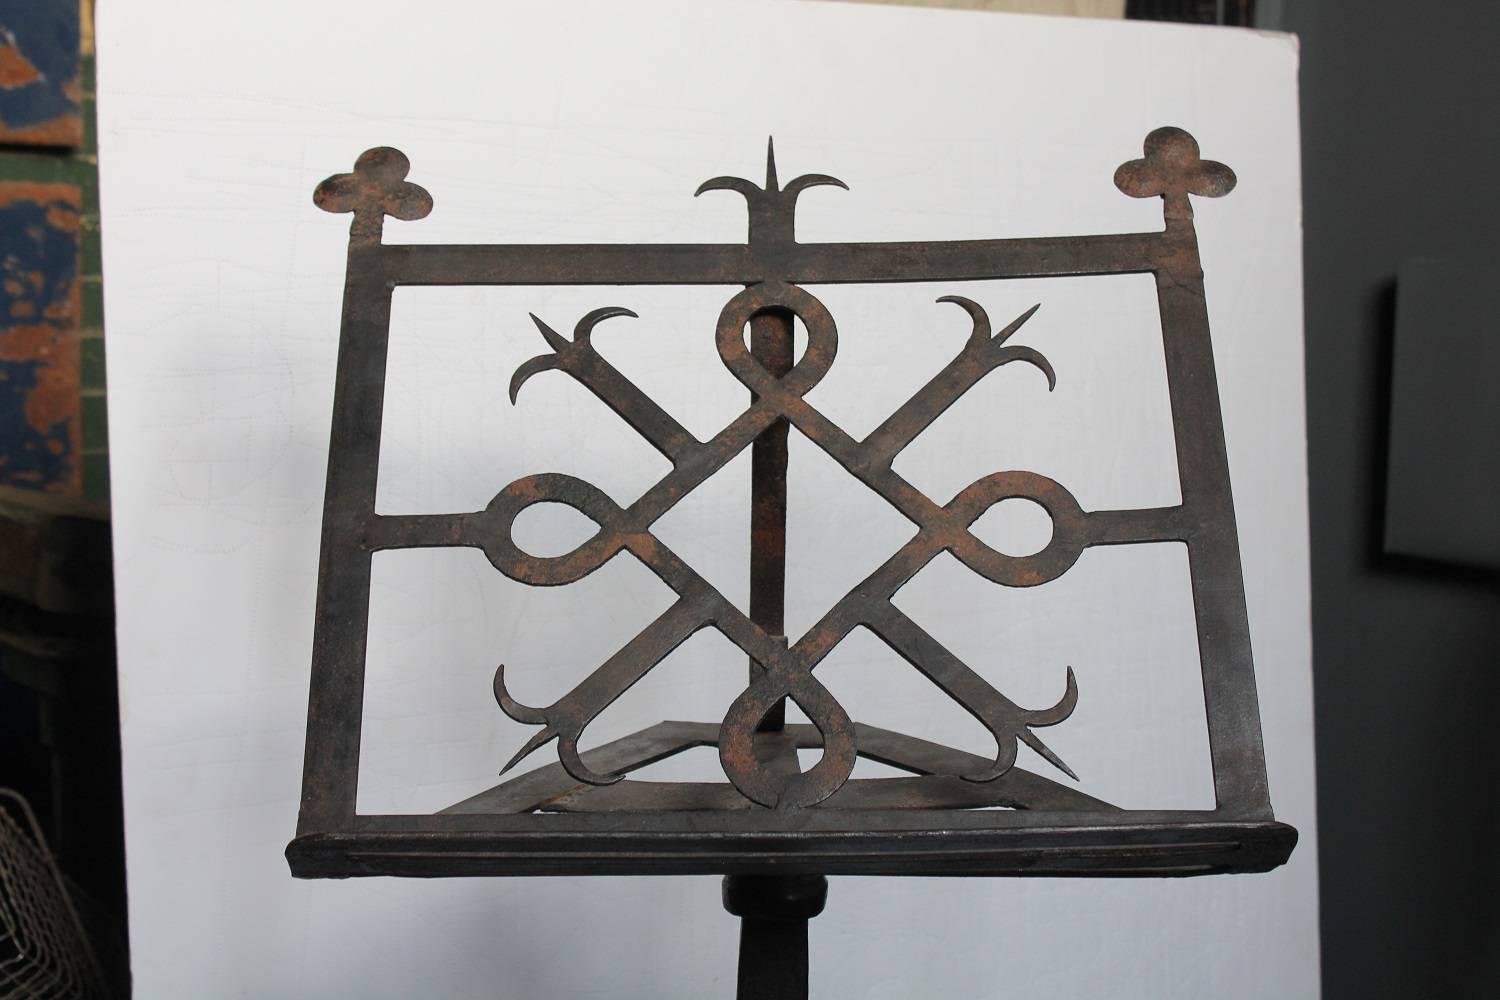 20th Century handmade iron book/hostess stand by Martins Stanford